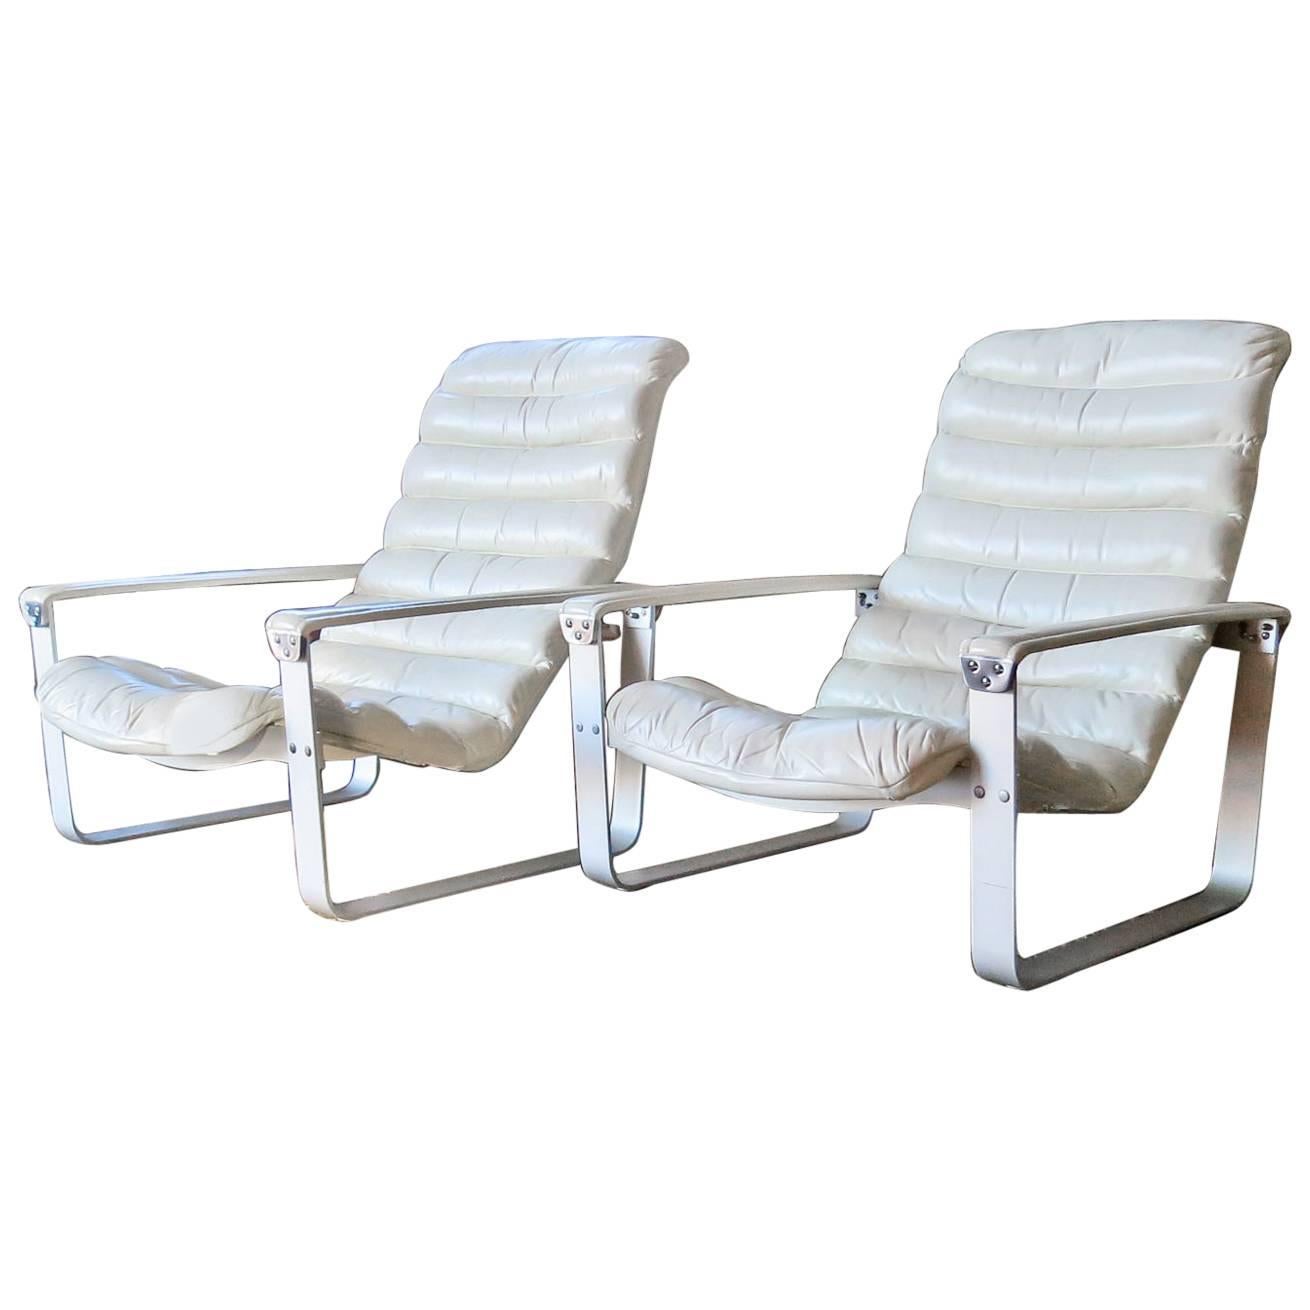 Asko Pulkka Leather Lounge Chairs by Ilmari Lappalainen, Finland, 1960s For Sale